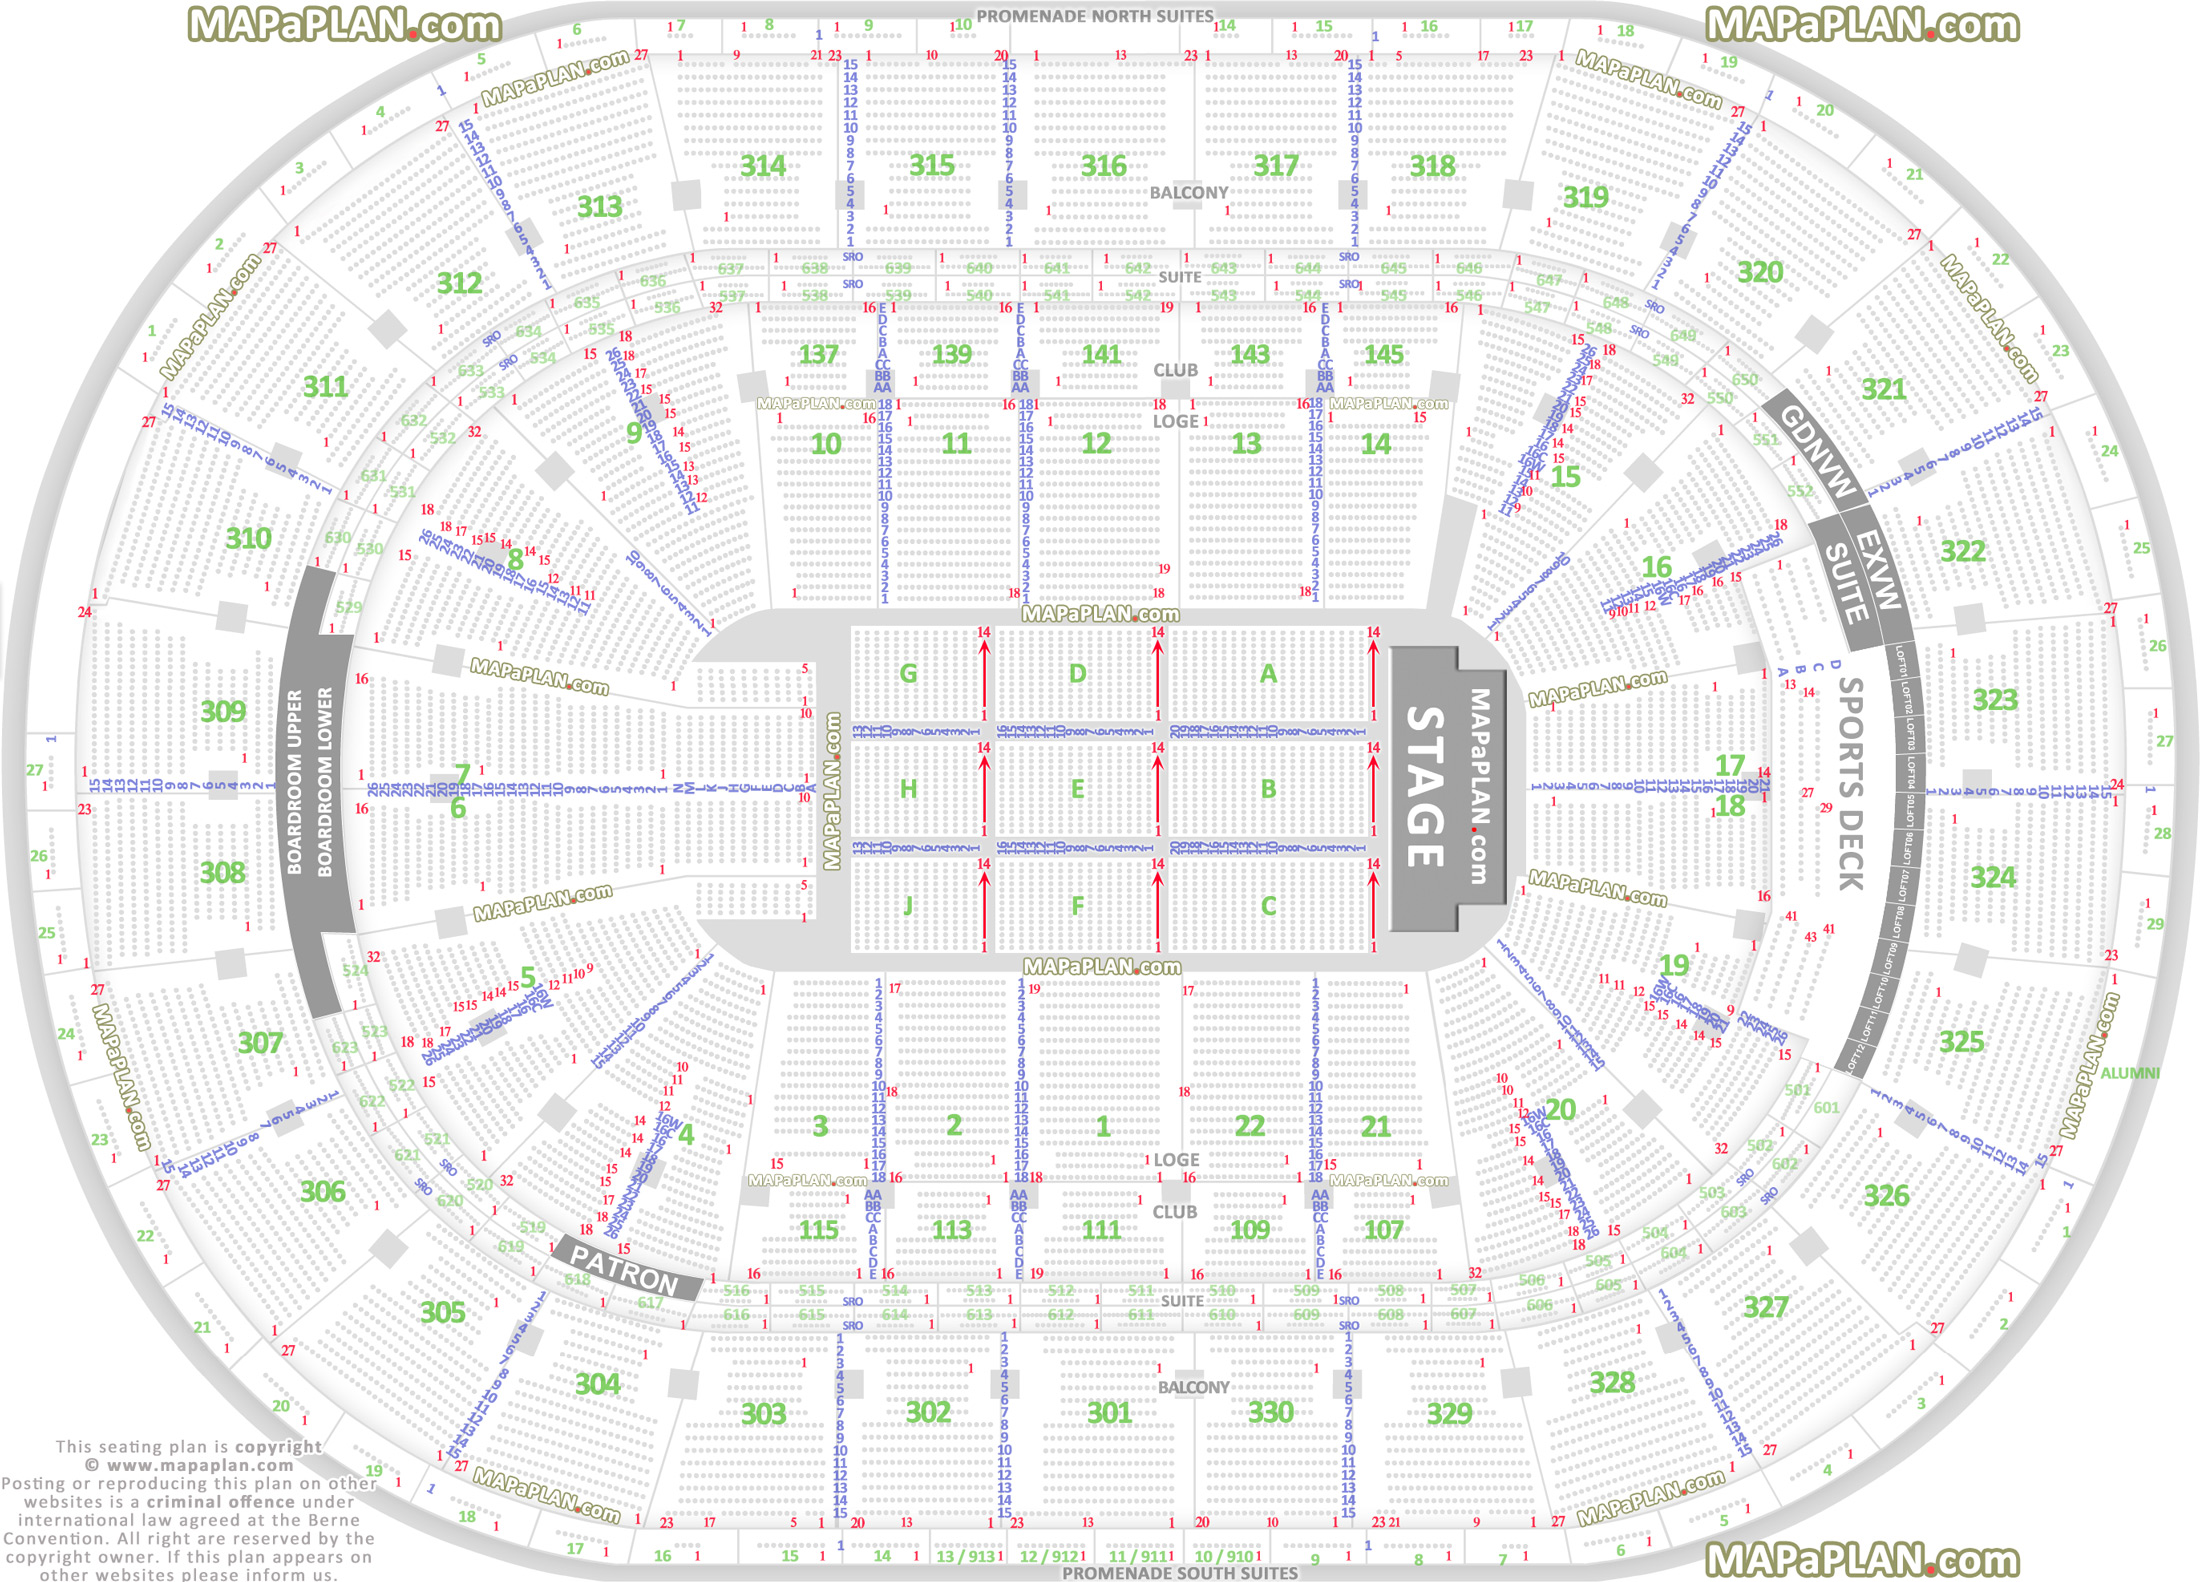 detailed seat row numbers end stage full concert sections floor plan arena lower upper bowl layout Boston TD Garden seating chart